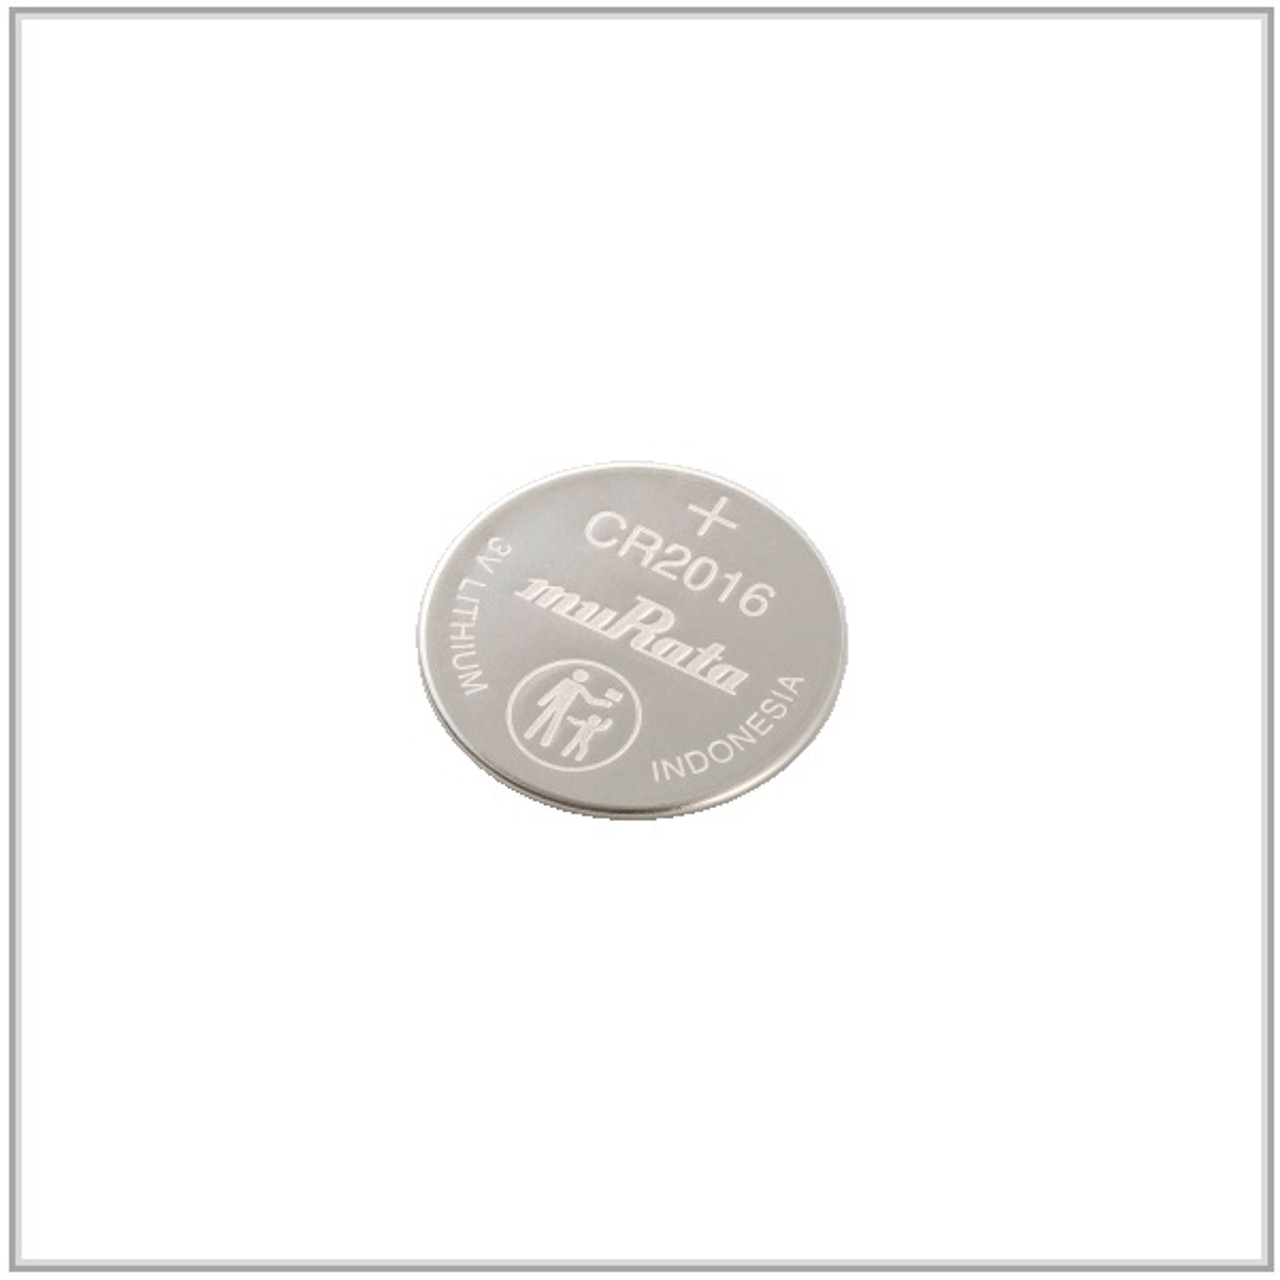 Murata CR2450 3V Lithium Coin Cell (100 Batteries) - Replaces Sony CR2450